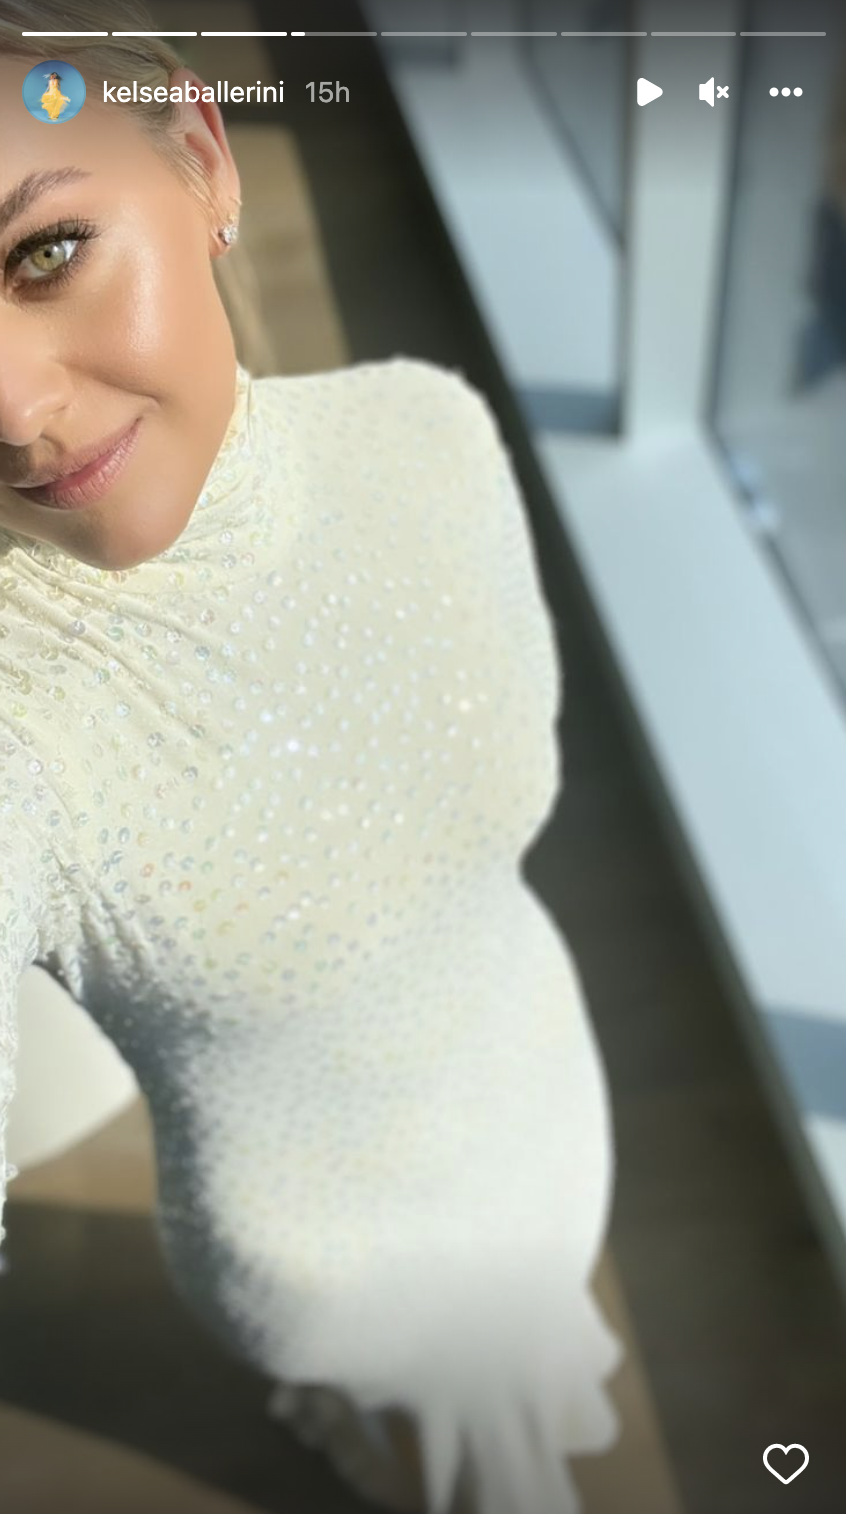 Kelsea Ballerini teases her outfit at the 15th Annual Academy of Country Music Honors in Nashville, Tennessee (Credit: Kelsea Ballerini/Instagram).